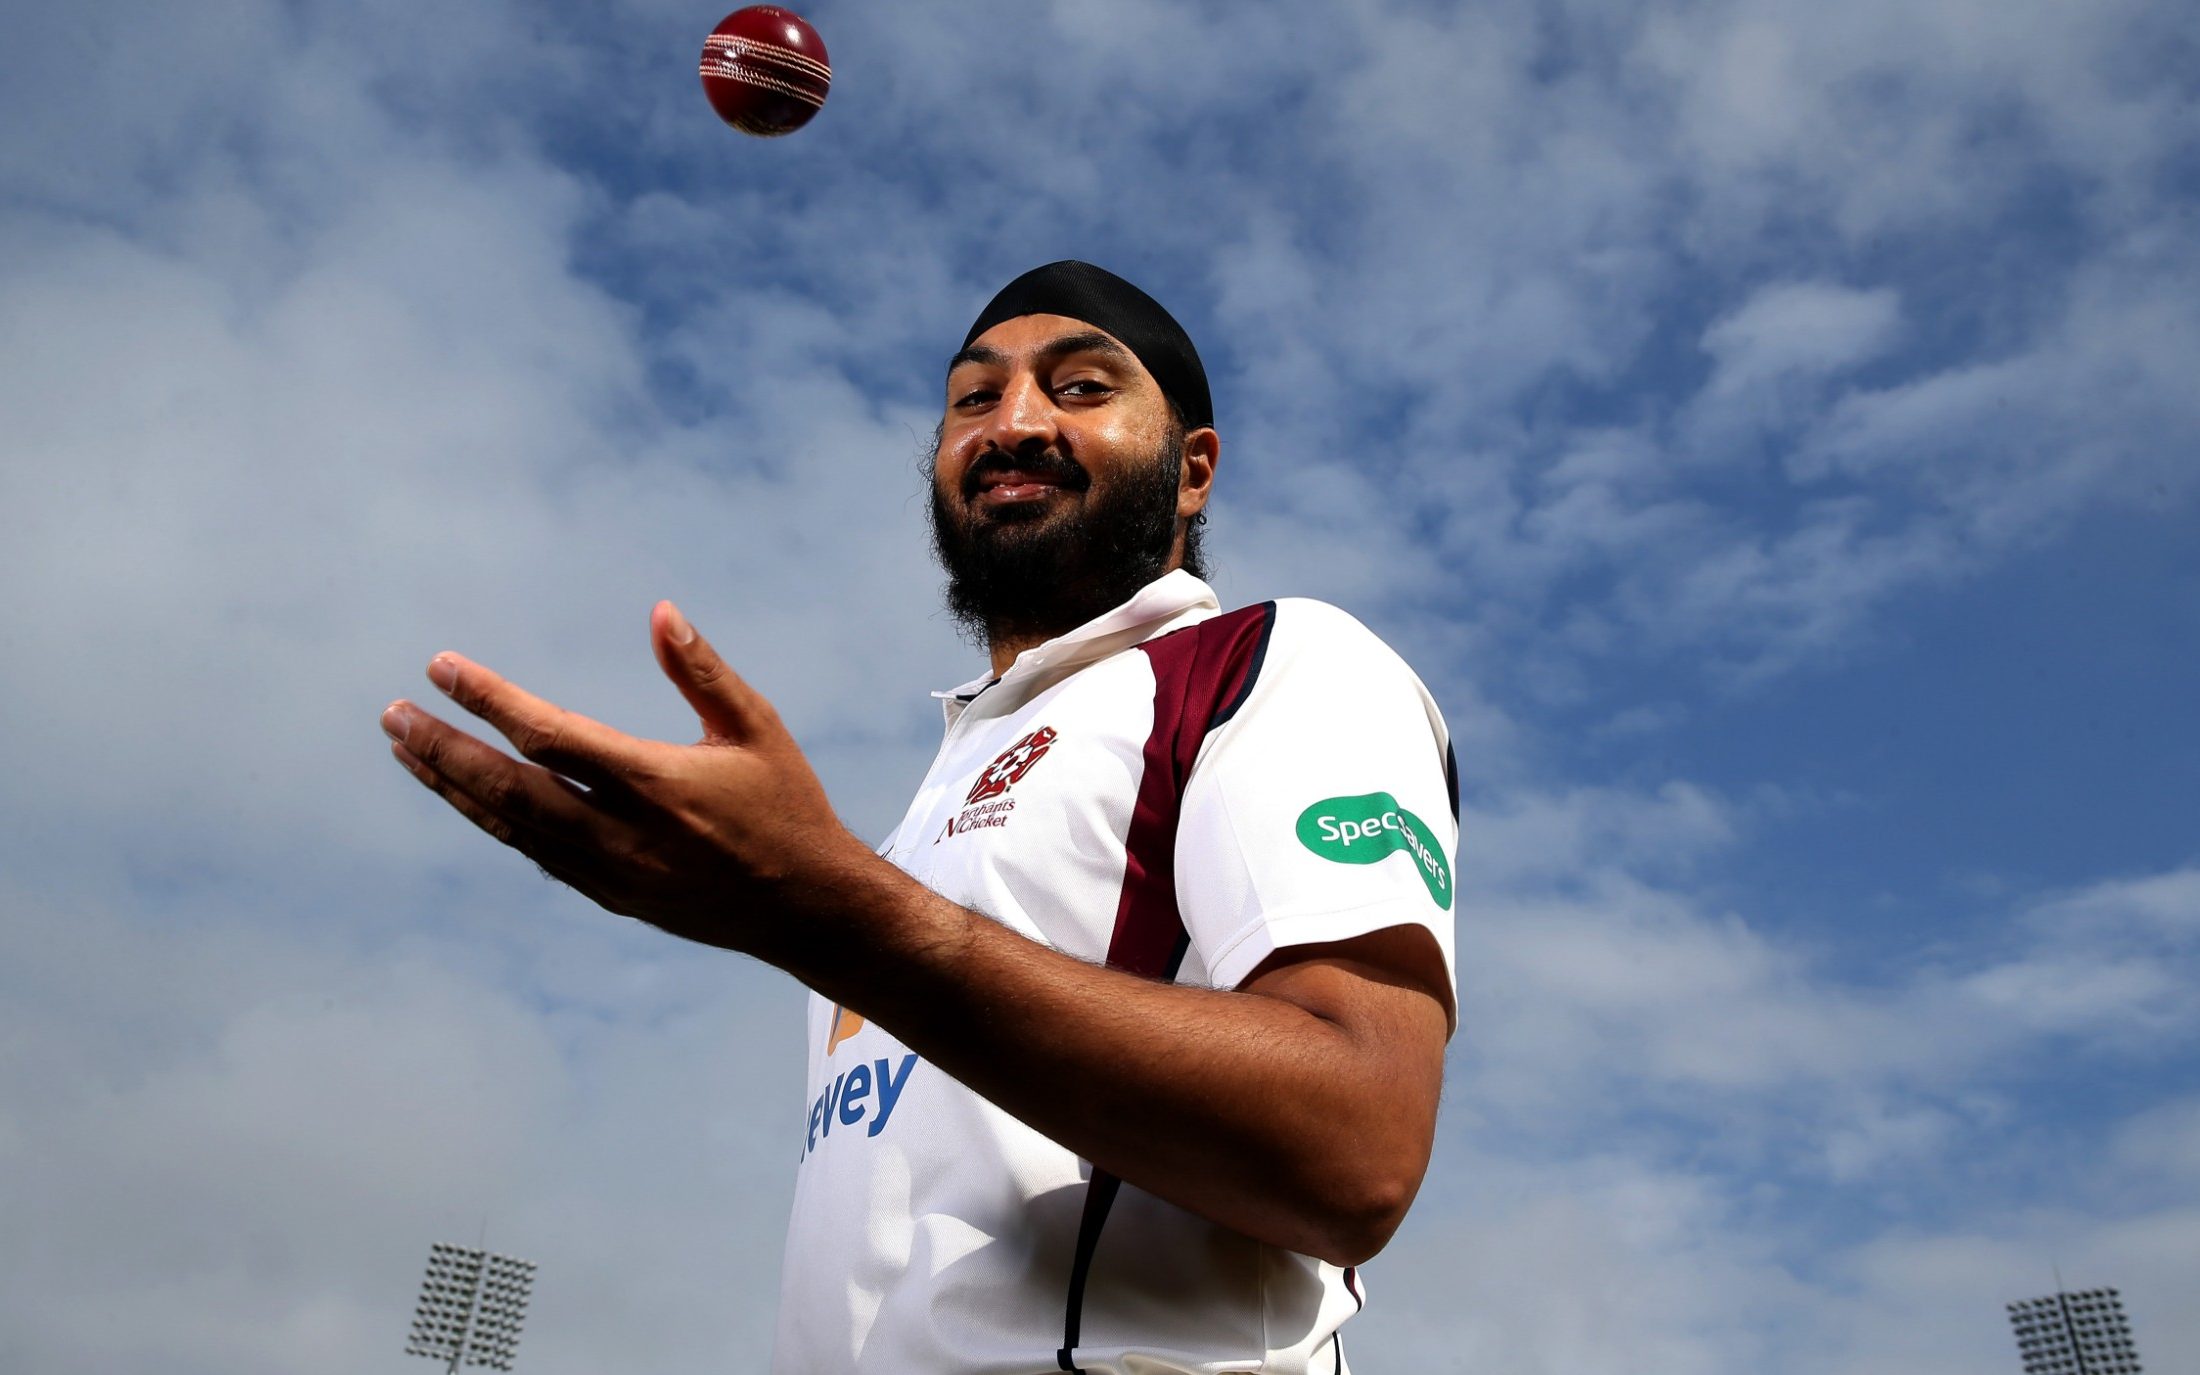 monty panesar to stand for george galloway’s party at general election